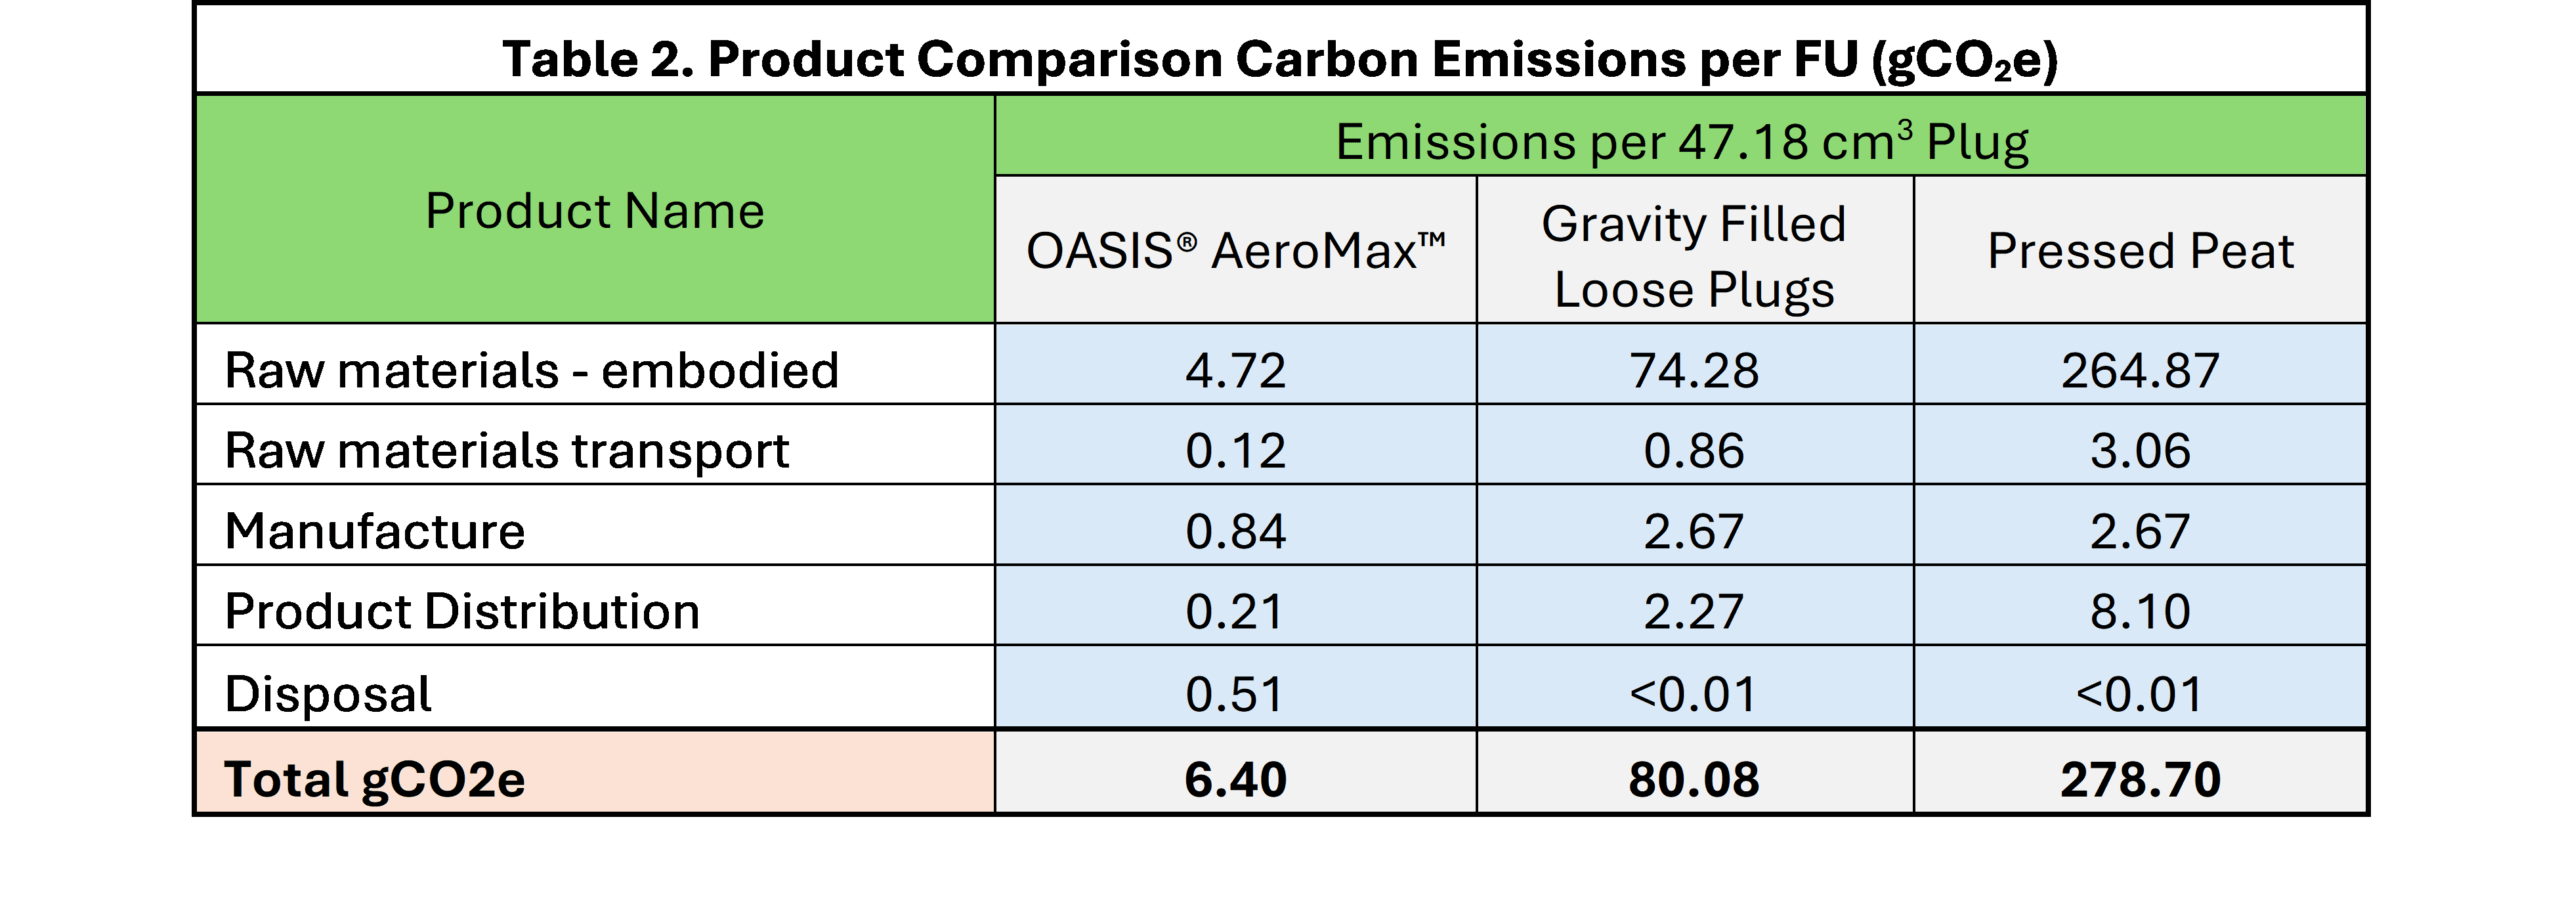 Oasis Grower Solutions product comparison of carbon emissions per EU